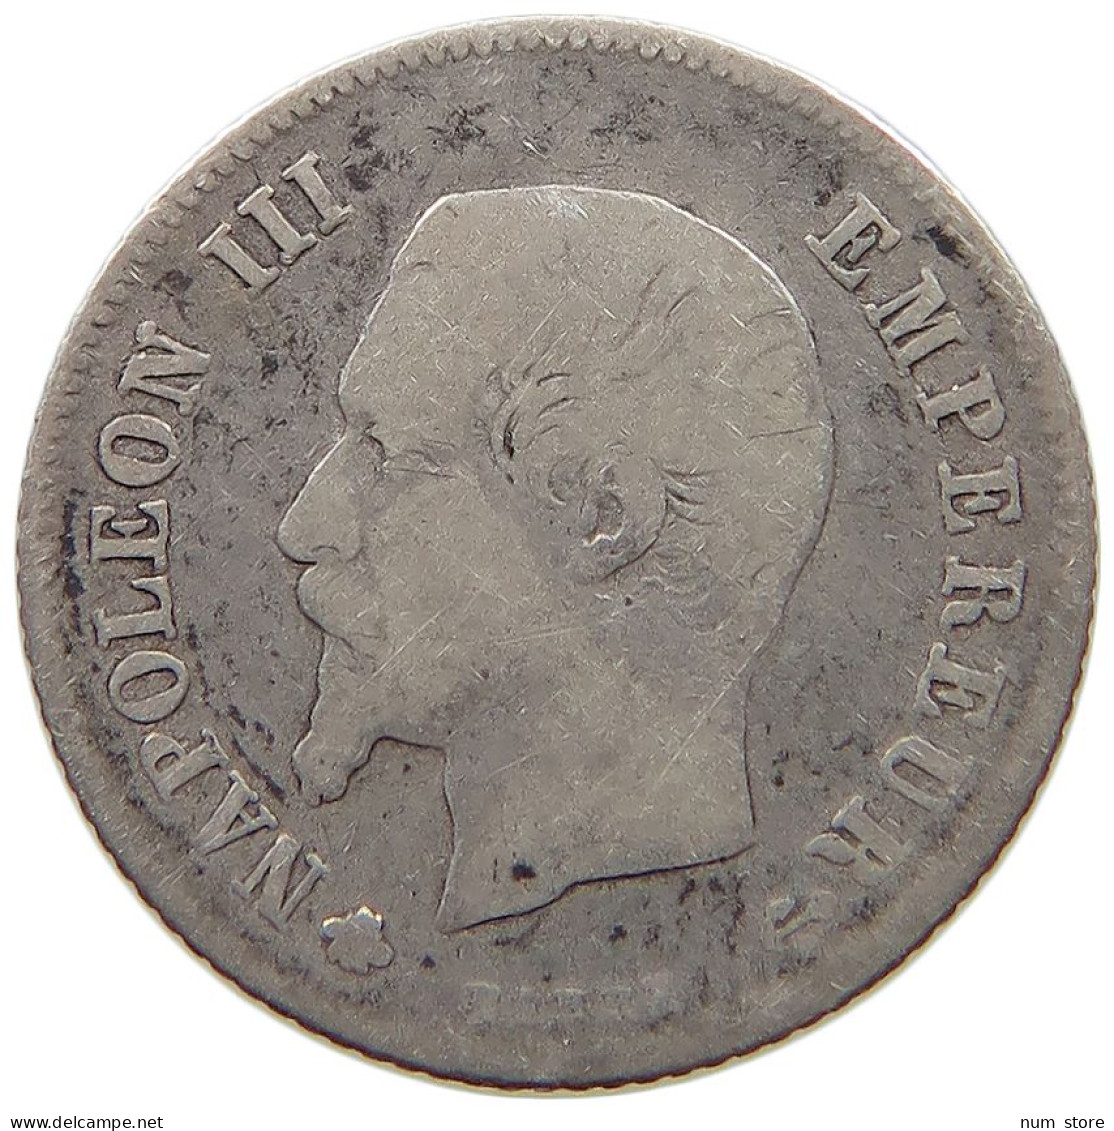 FRANCE 20 CENTIMES 1860 BB Napoleon III. (1852-1870) #a033 0197 - 20 Centimes